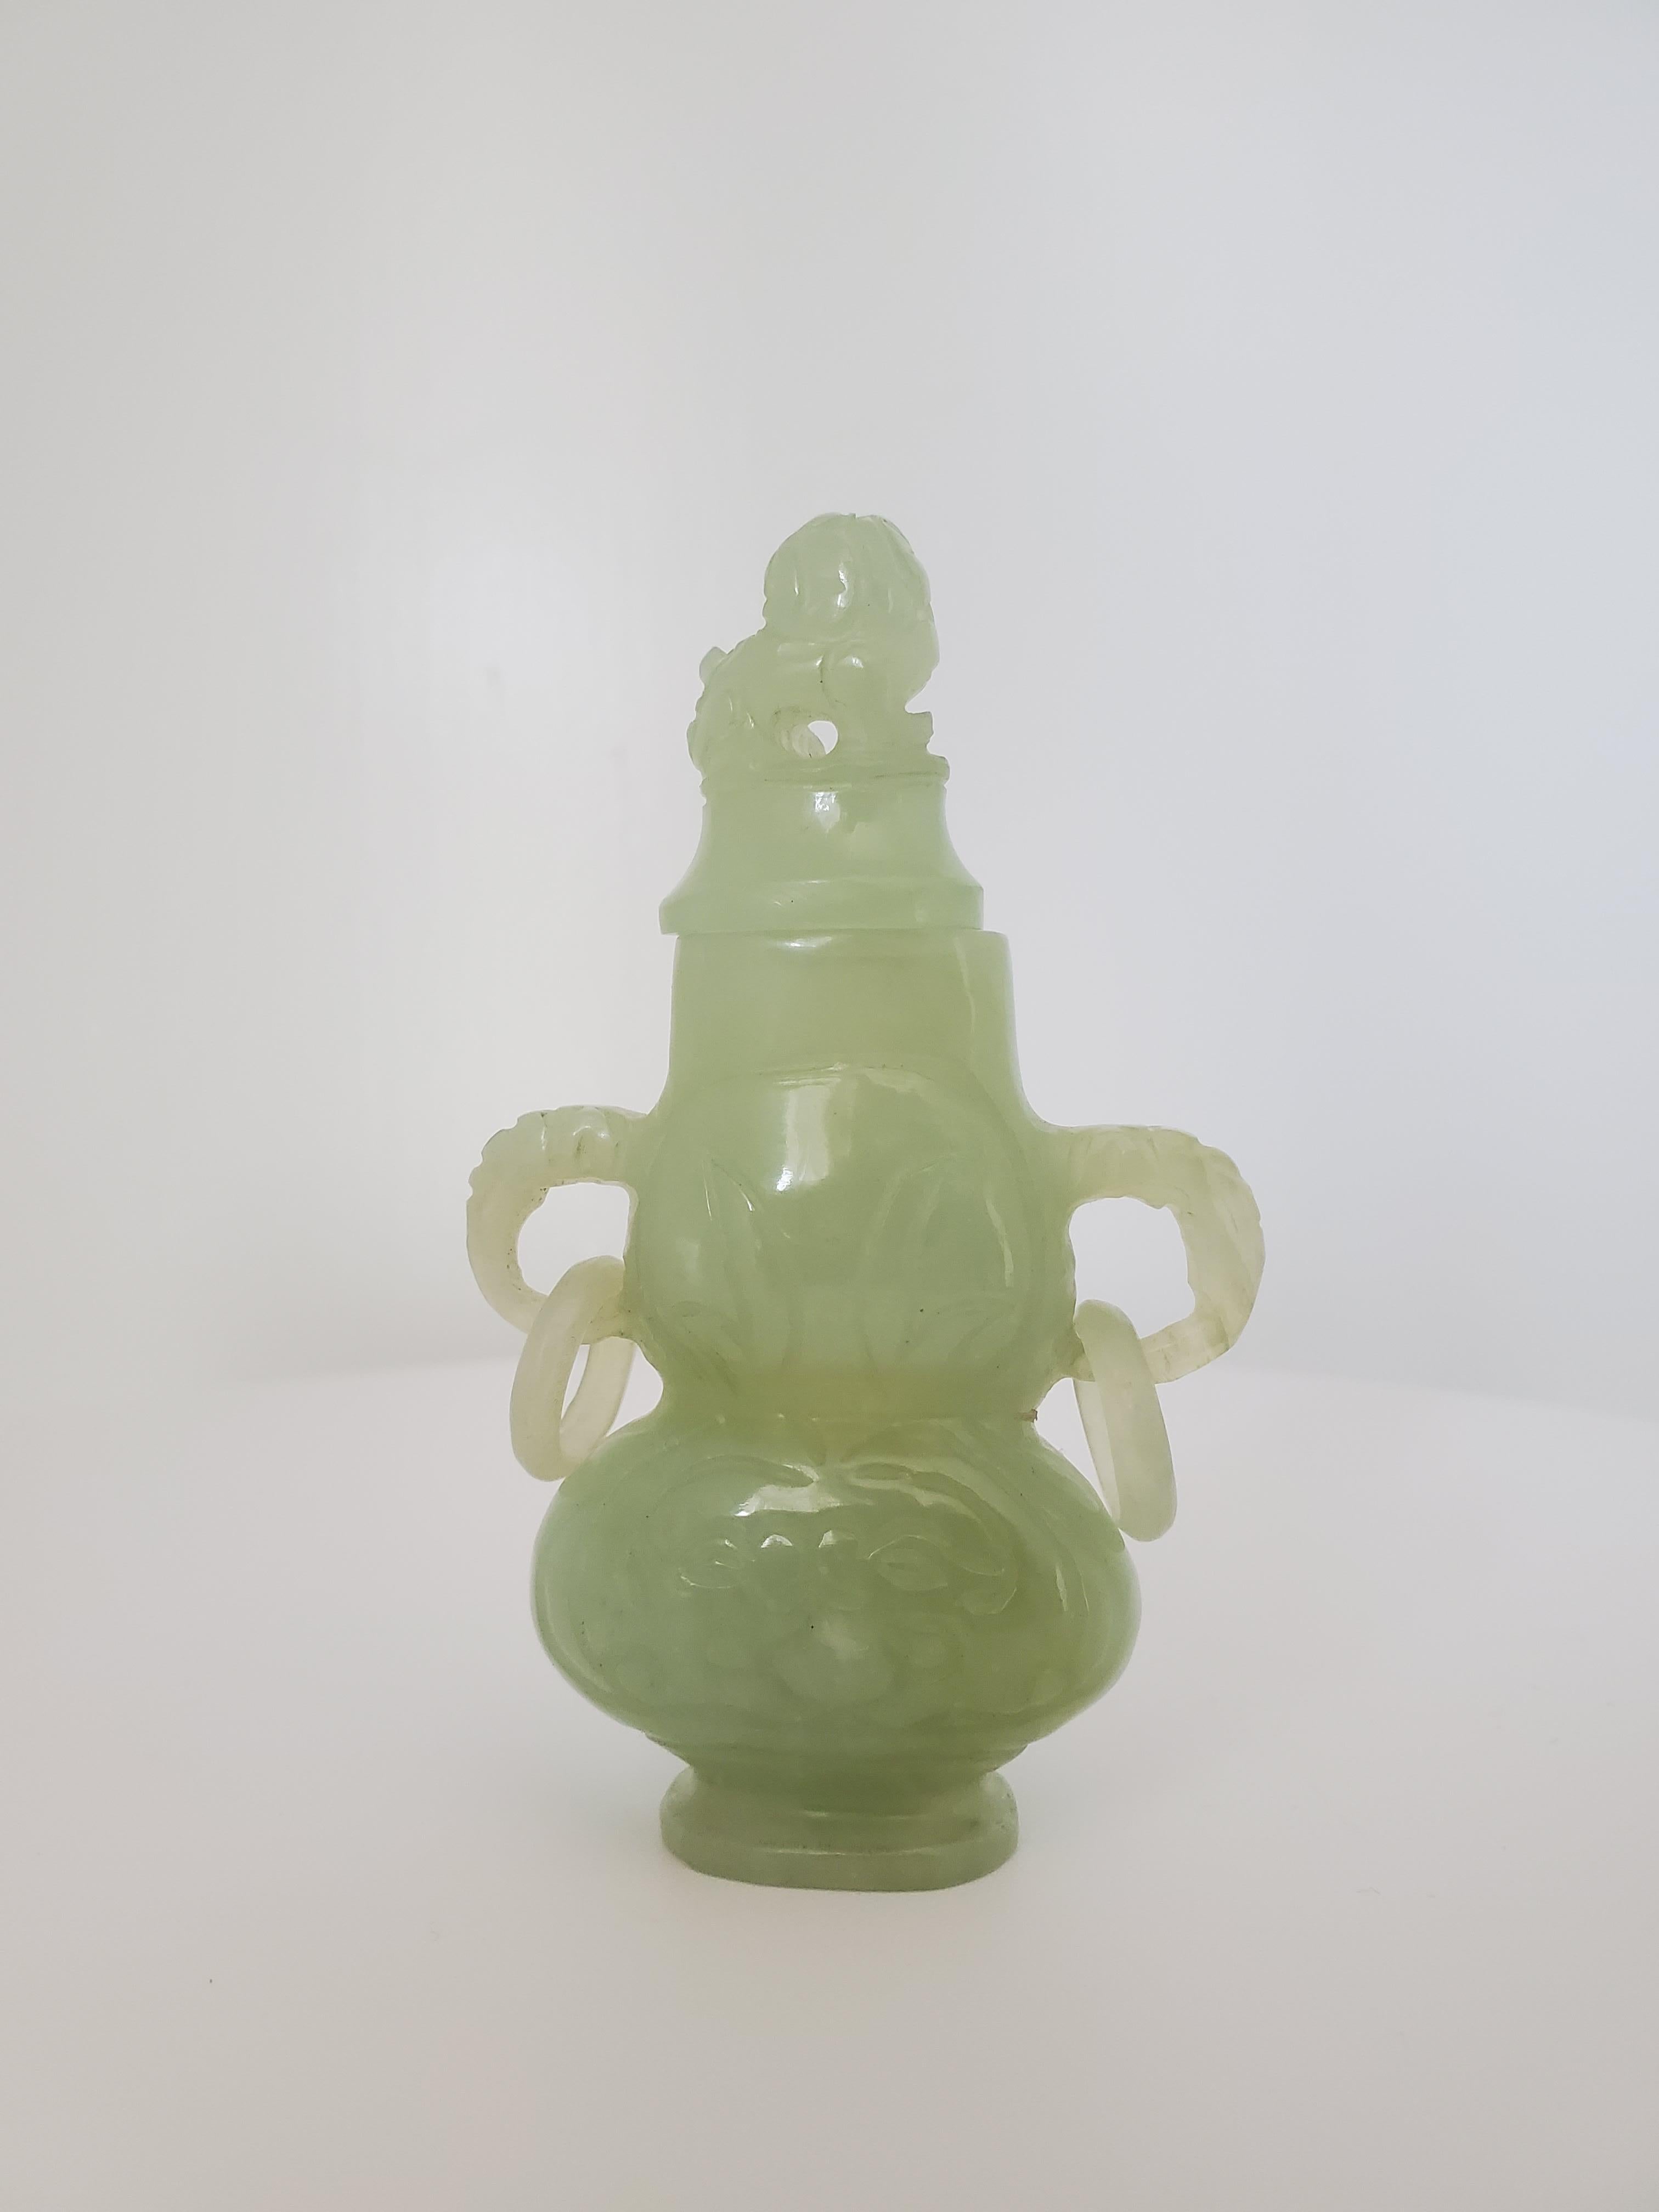 This archaistic style lidded vase or censer is a lovely piece of jade. It consists of a flattened baluster body and figural handles with hanging rings. The front and back body are carved with archaistic masks and the lid is a carved figural of a